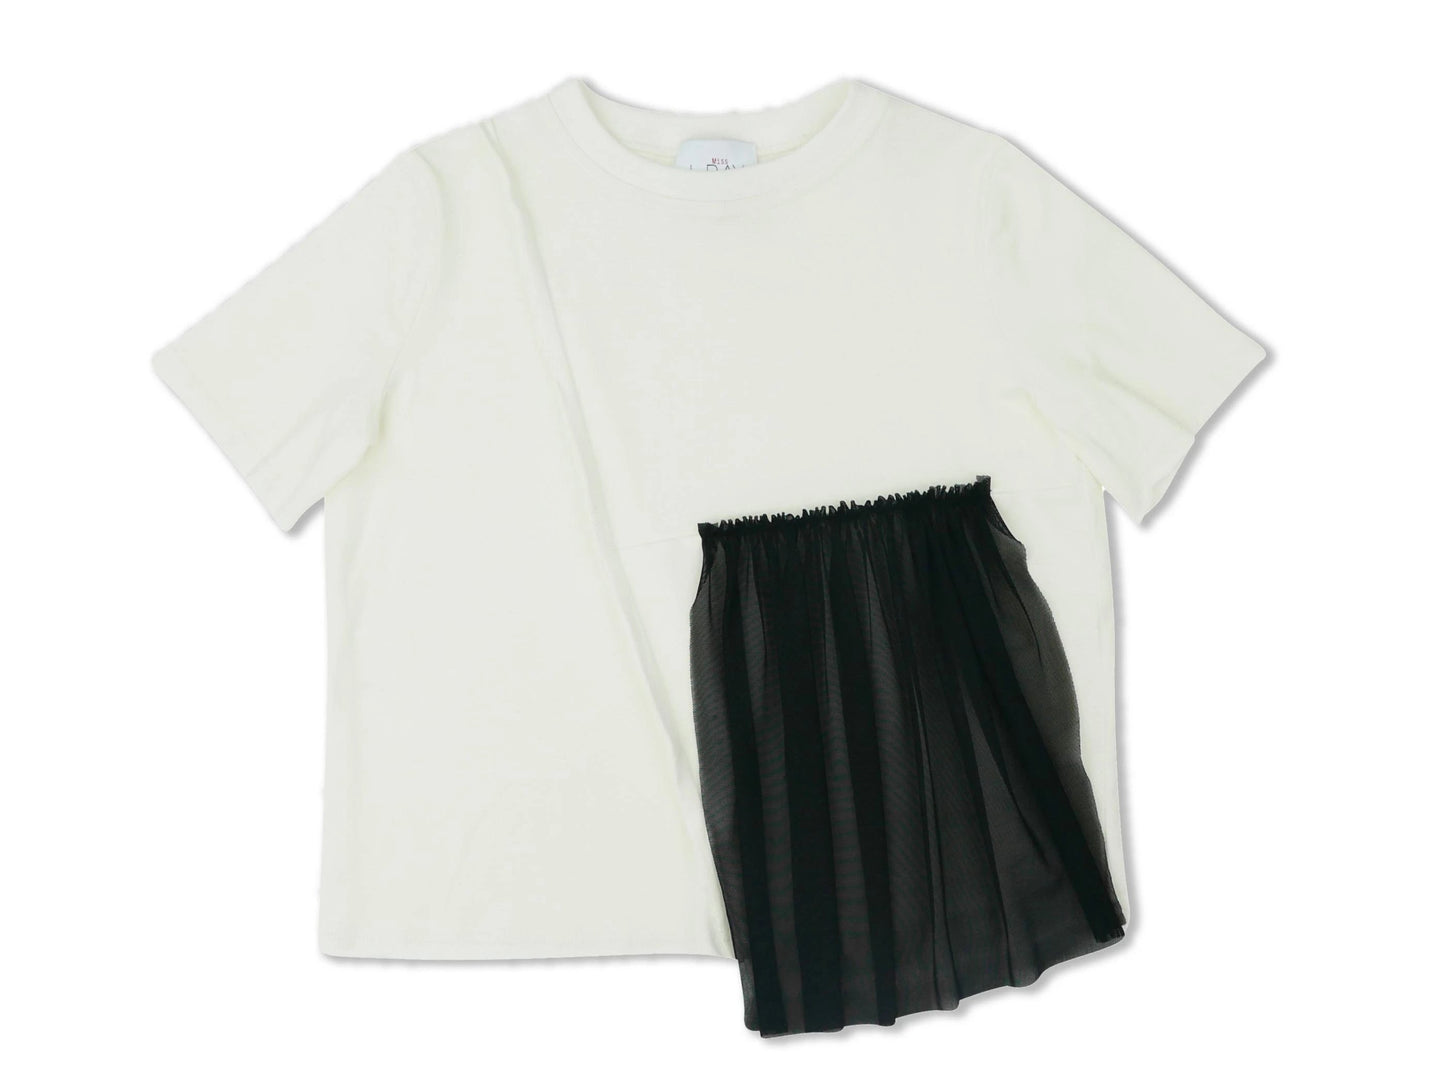 Miss L.Ray Jersey June Tulle Top